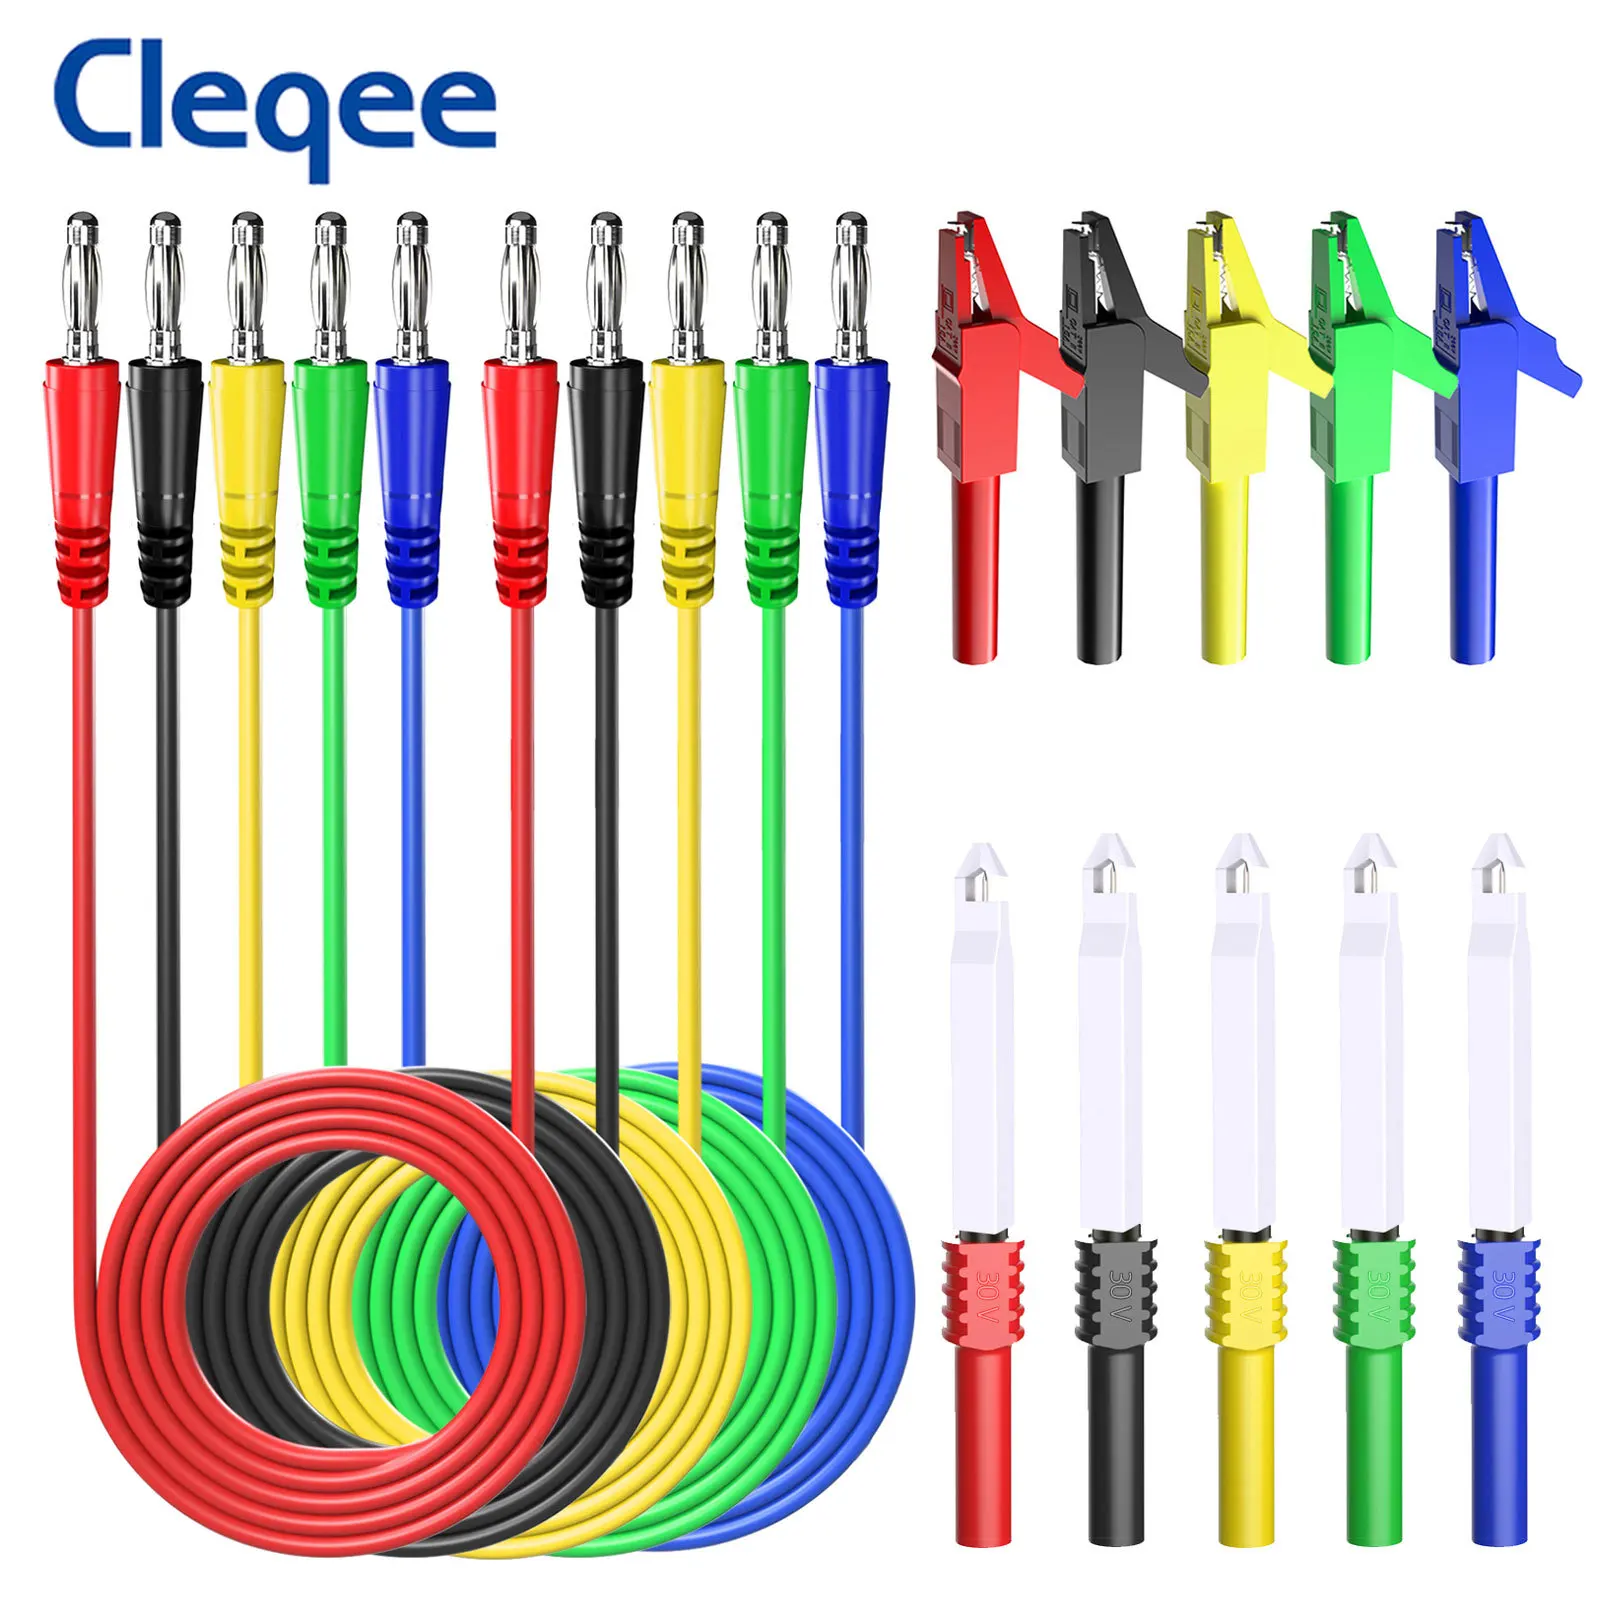 

Cleqee P1043B Multimeter Test Leads Kit 4mm Banana Plug with Safety Piercing Test Probes Crocodile Alligator Clips 1000V 10A